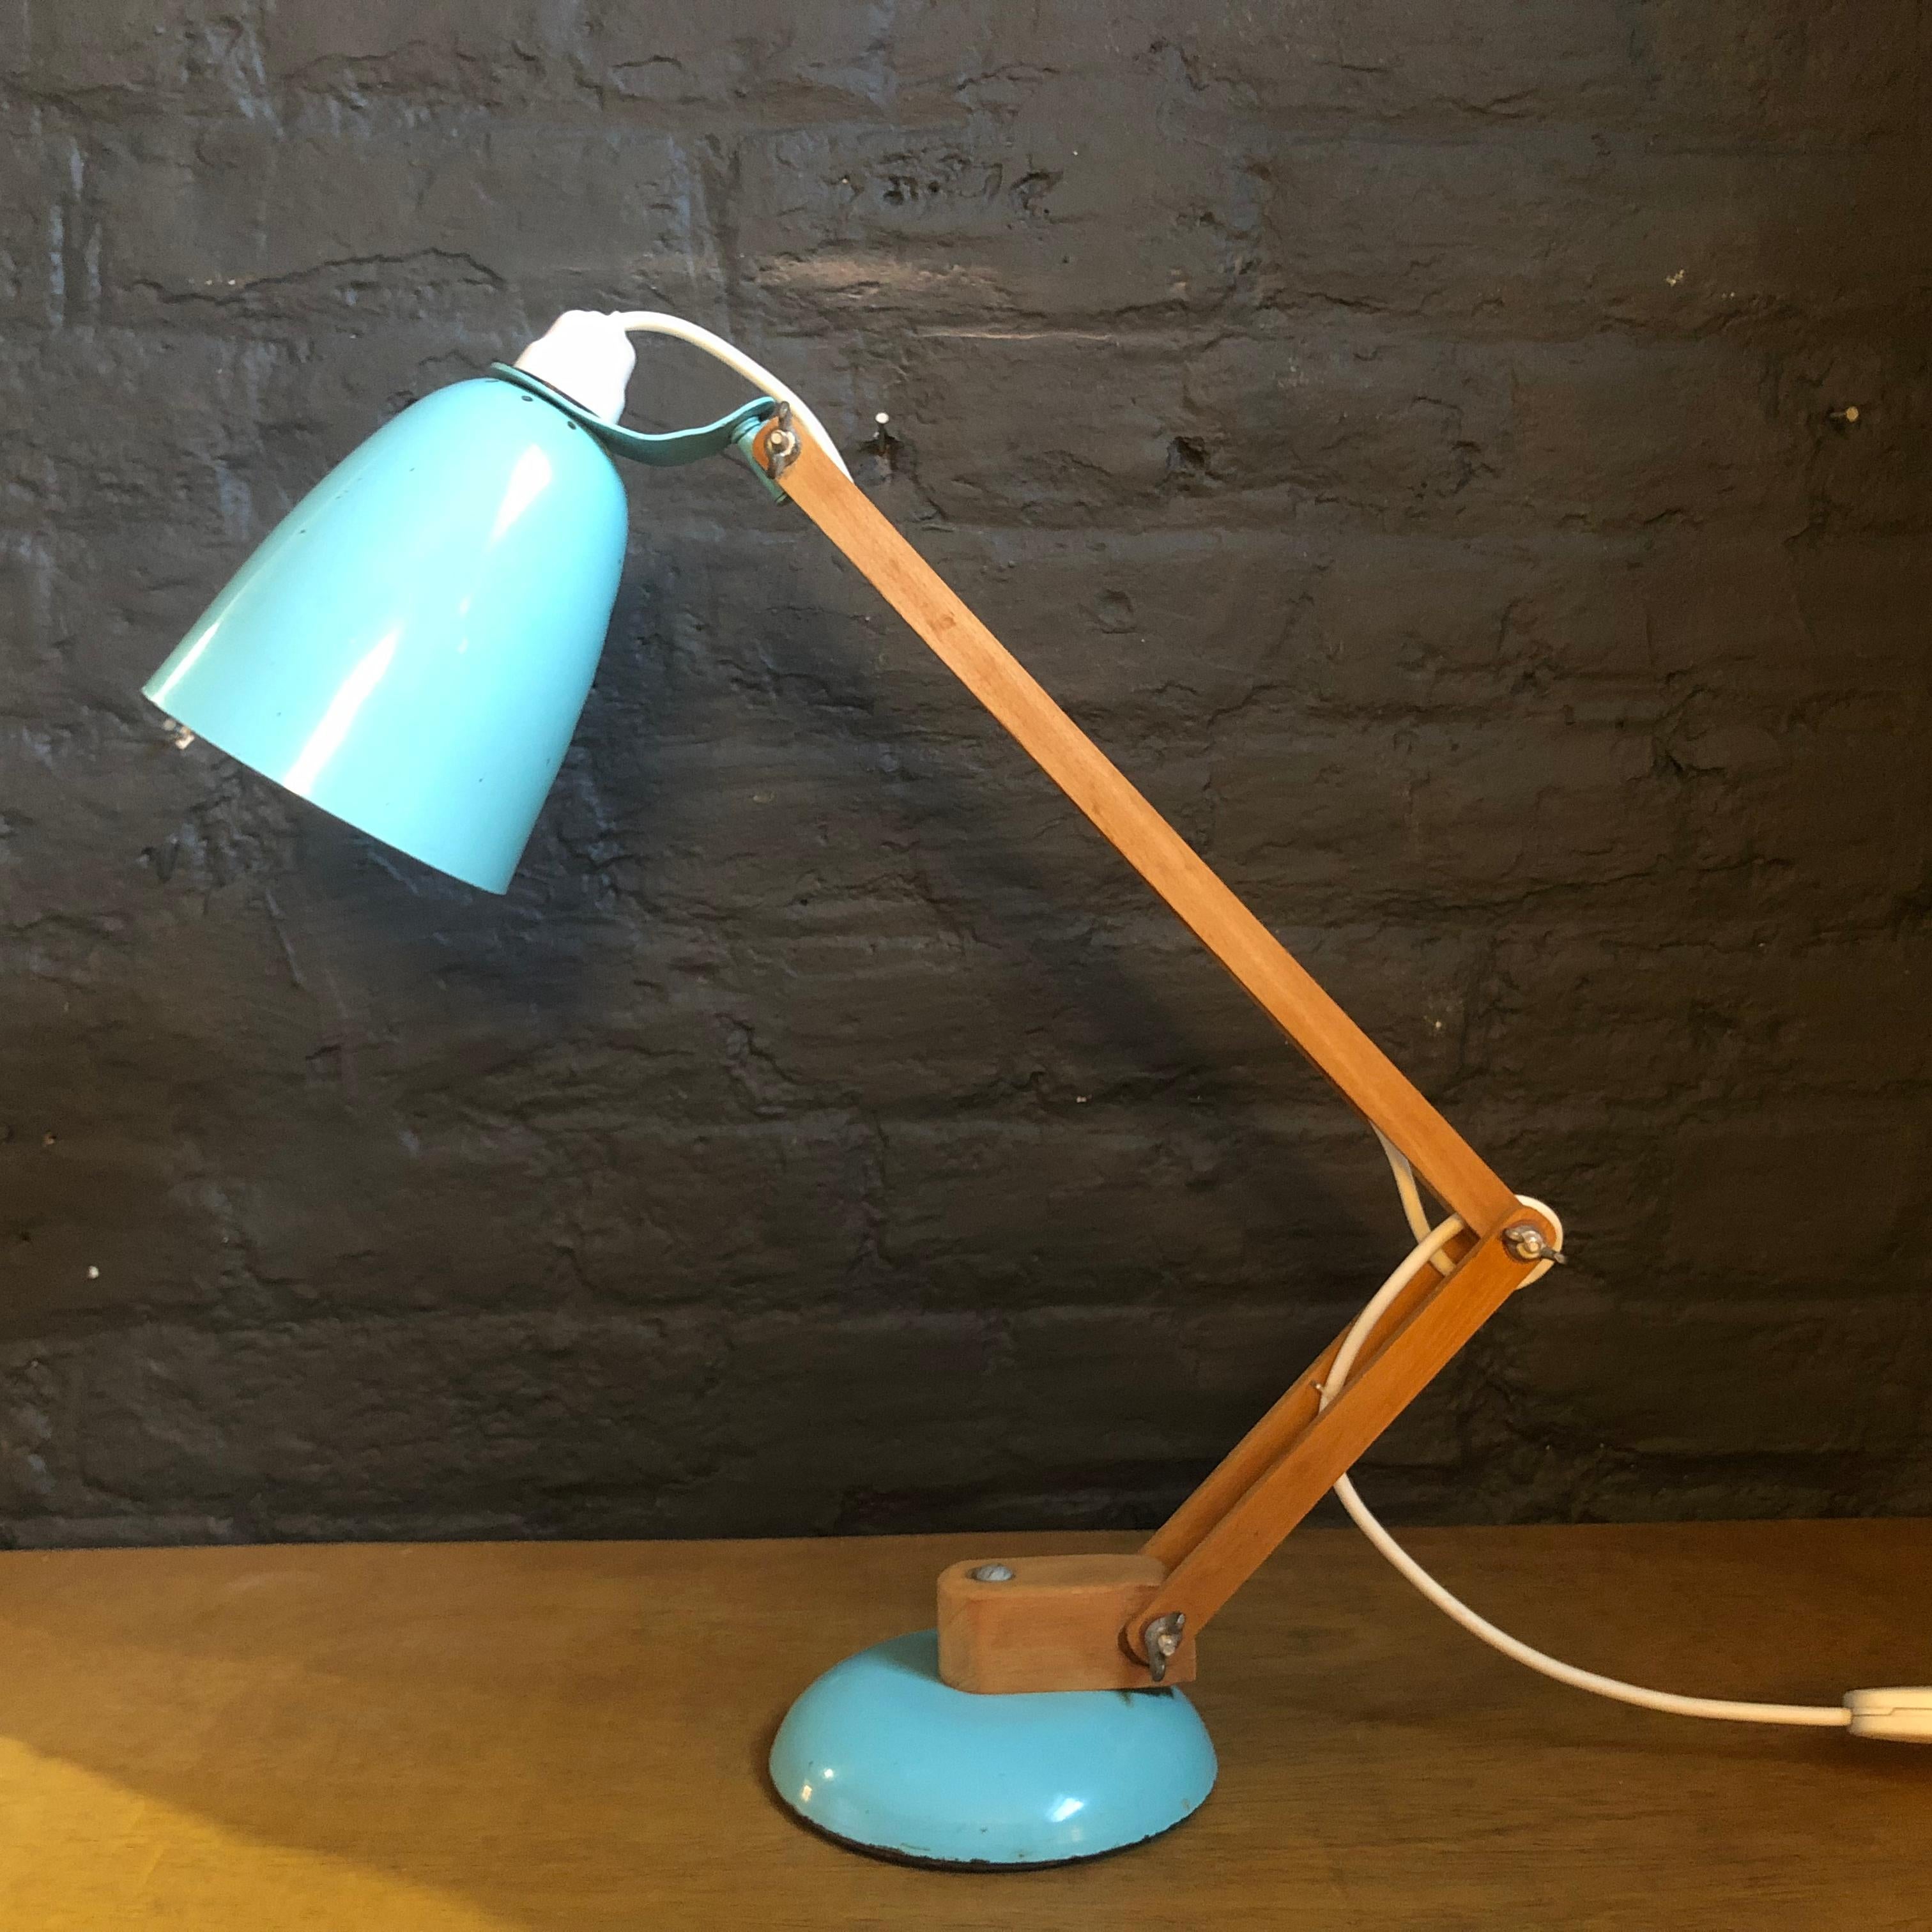 Vintage Maclamp desk or table lamp in turquoise with wooden arms.

Designed by Terence Conran for Habitat in the 1950s, this lamp is an icon of the 1950-1960s period.

In good vintage condition. Some signs of age, as to be expected, but nothing